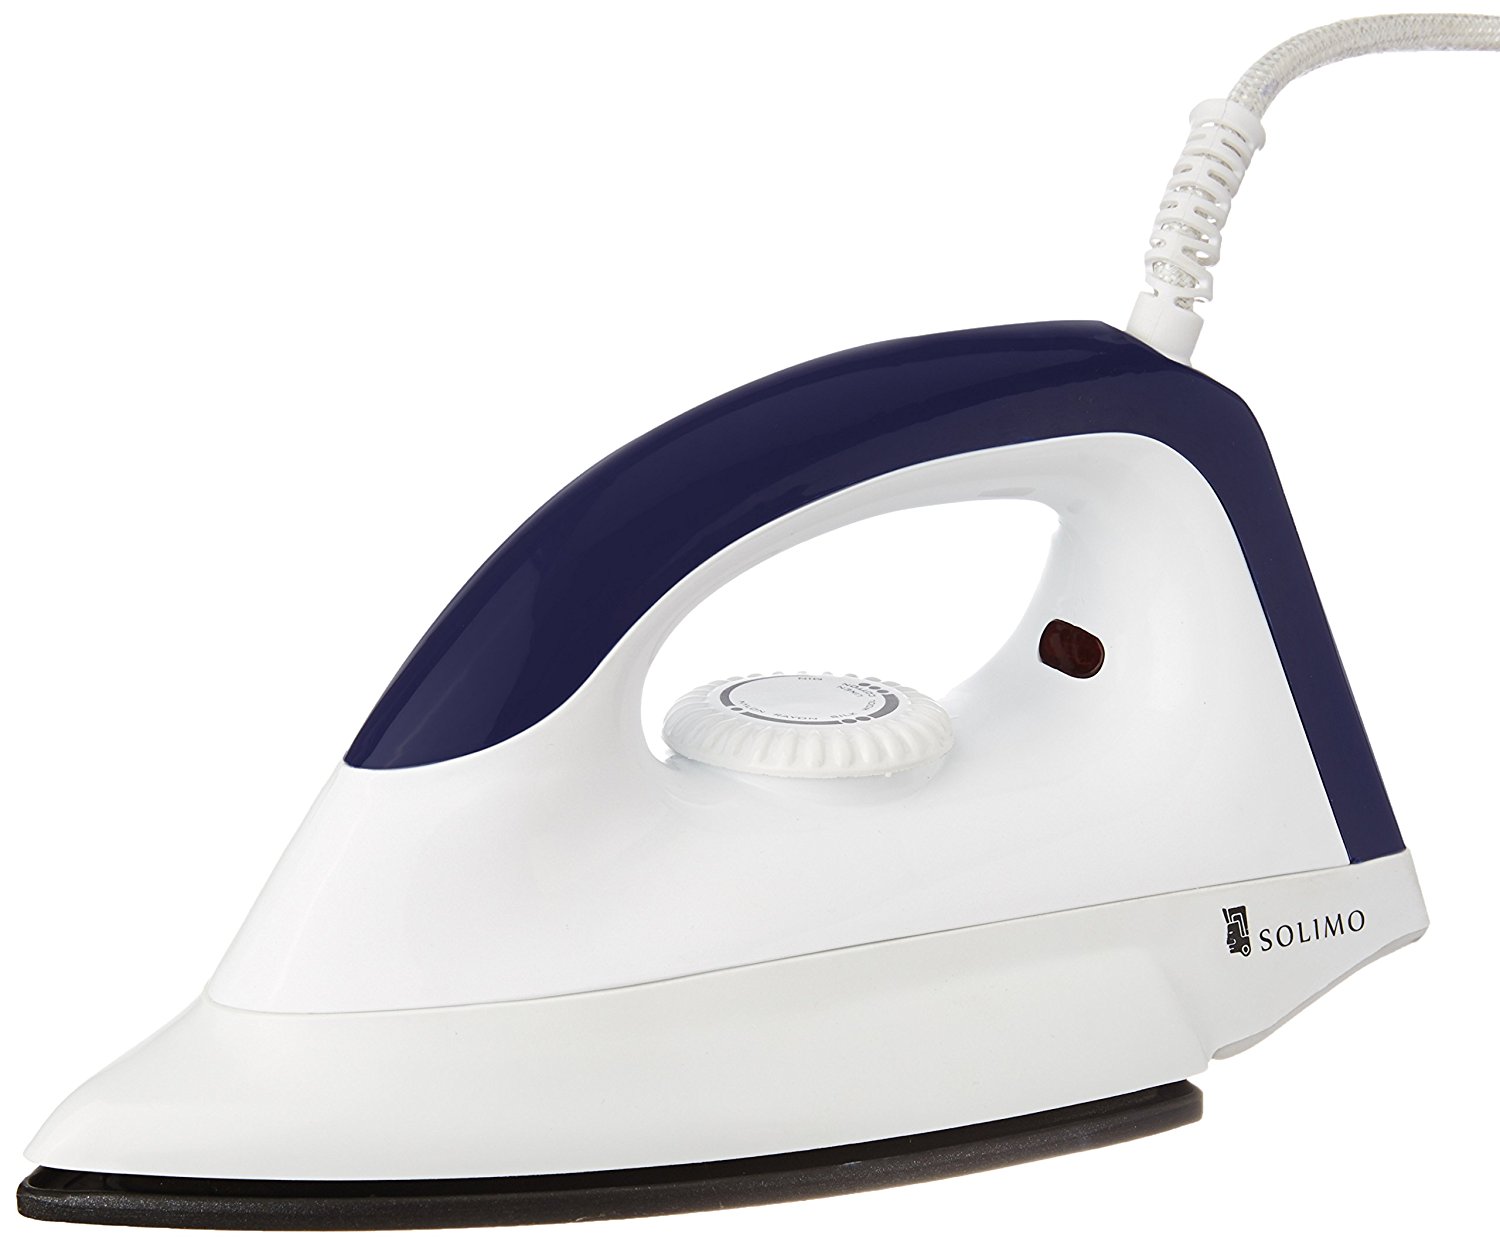 Amazon: Buy Solimo 1000-Watt Dry Iron (White and Blue) at Rs 365 only